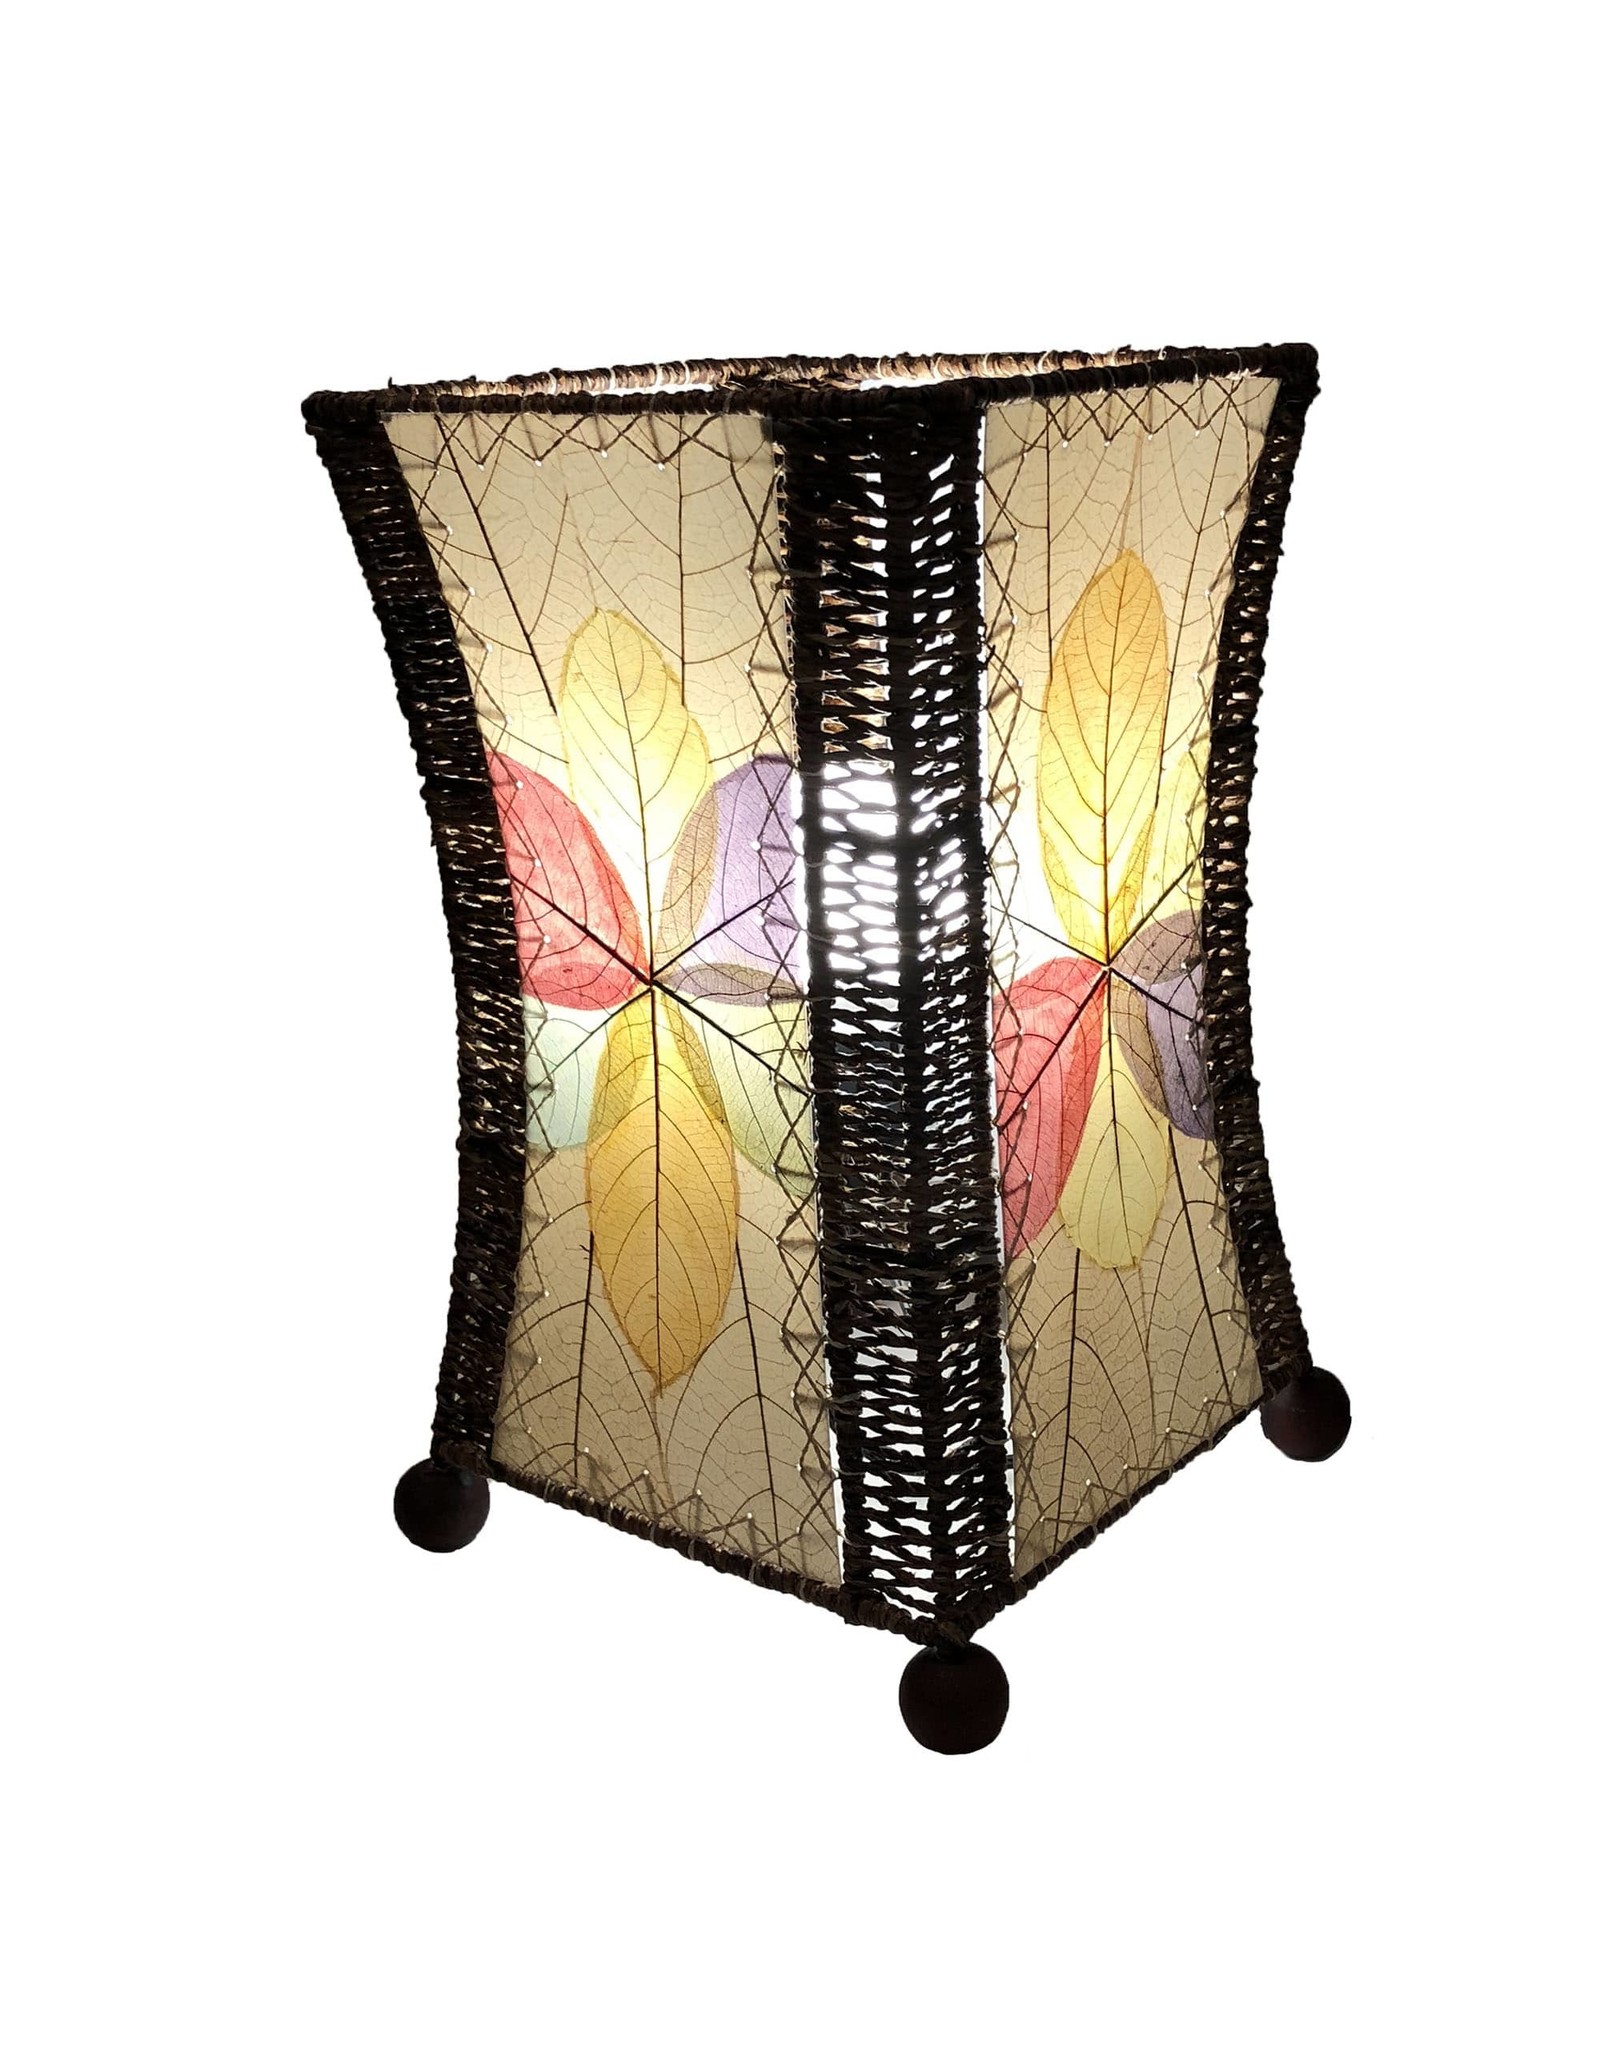 Trade roots Hourglass Table Multi Lamp, Philippines